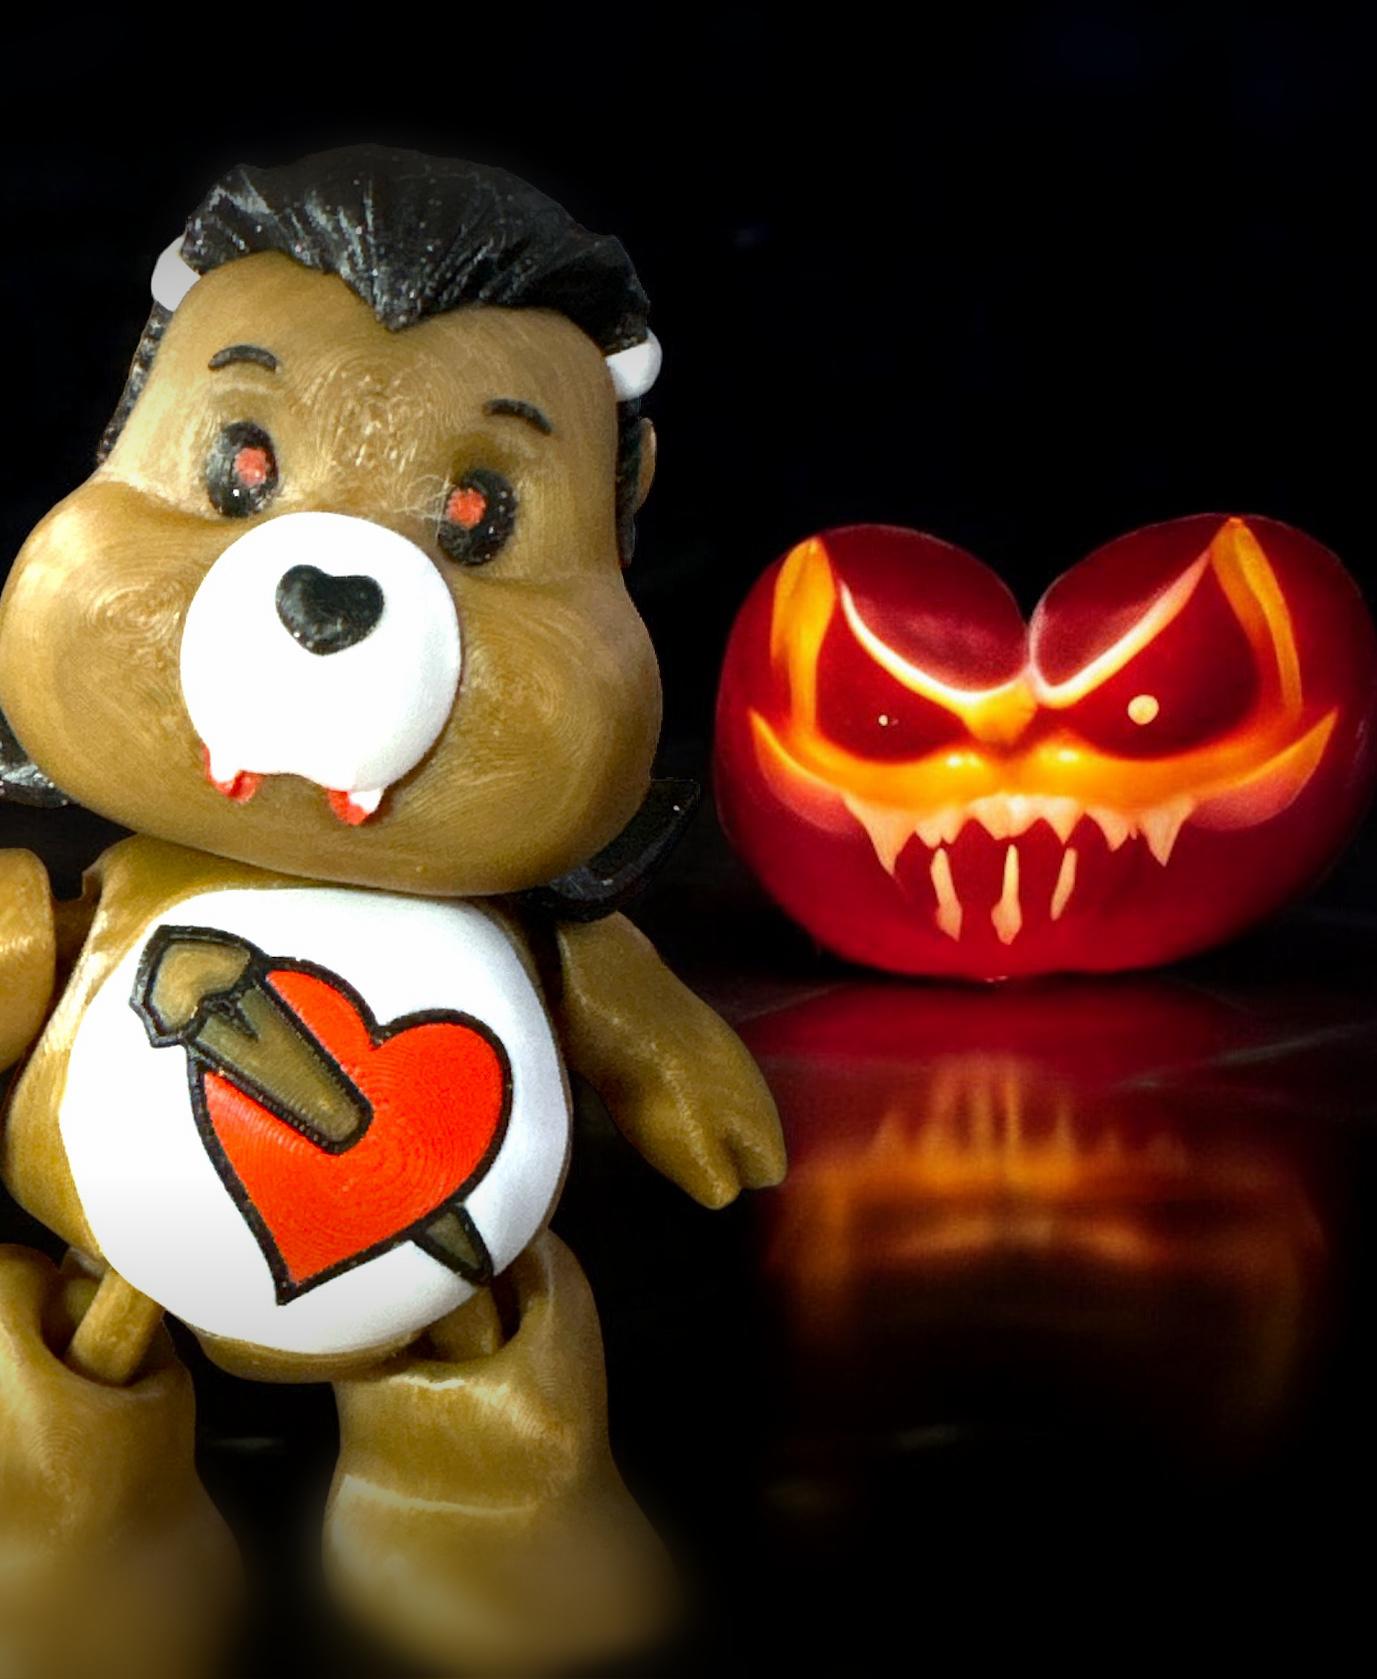 Dracula, Vampire, Care Bear, Print in Place, Articulated, Flexi, Flexible, Toy, Halloween Series.  3d model